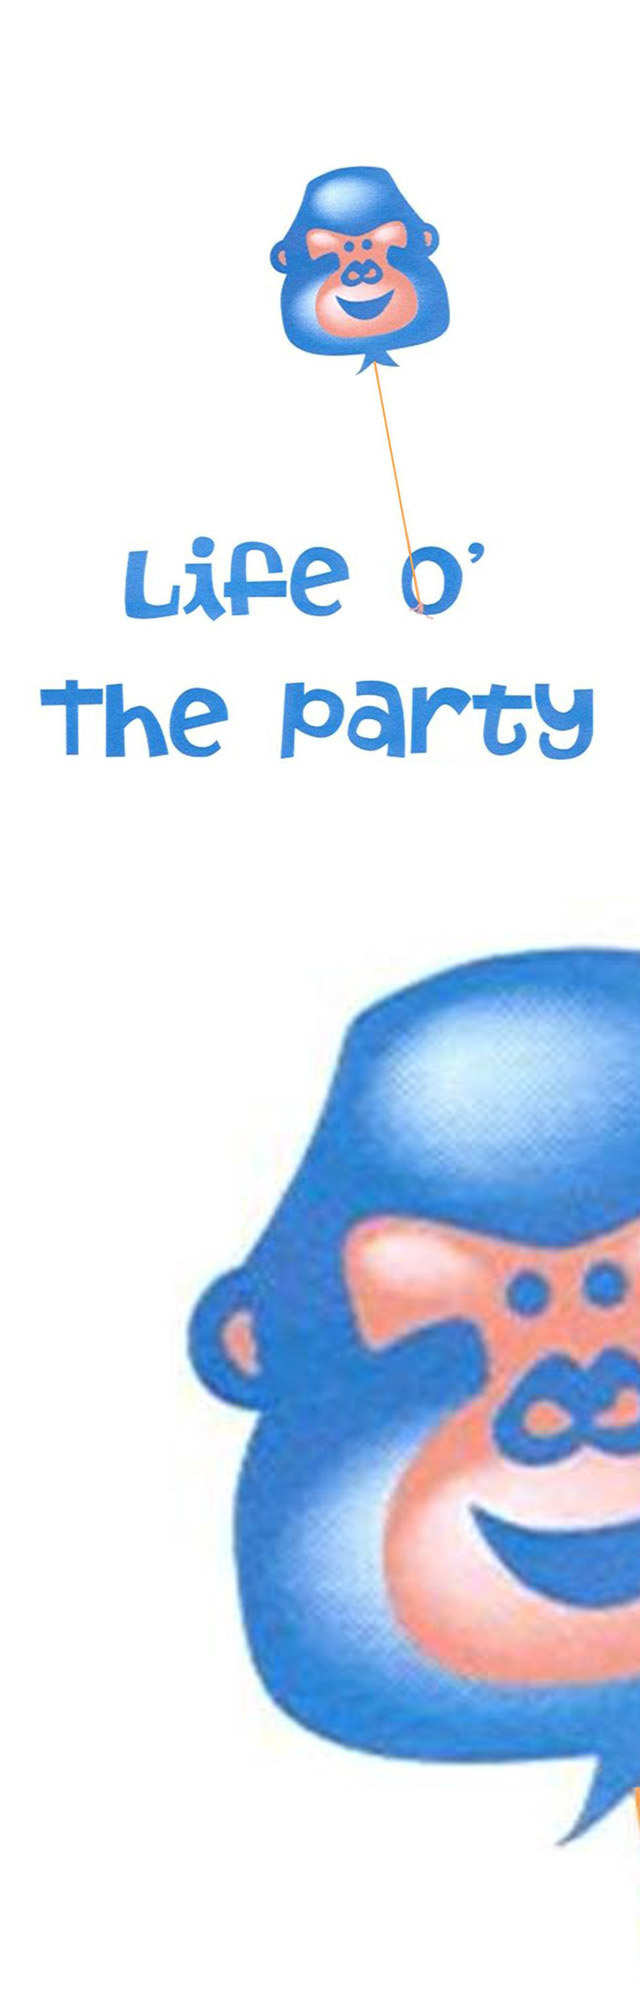 Life O’ the Party